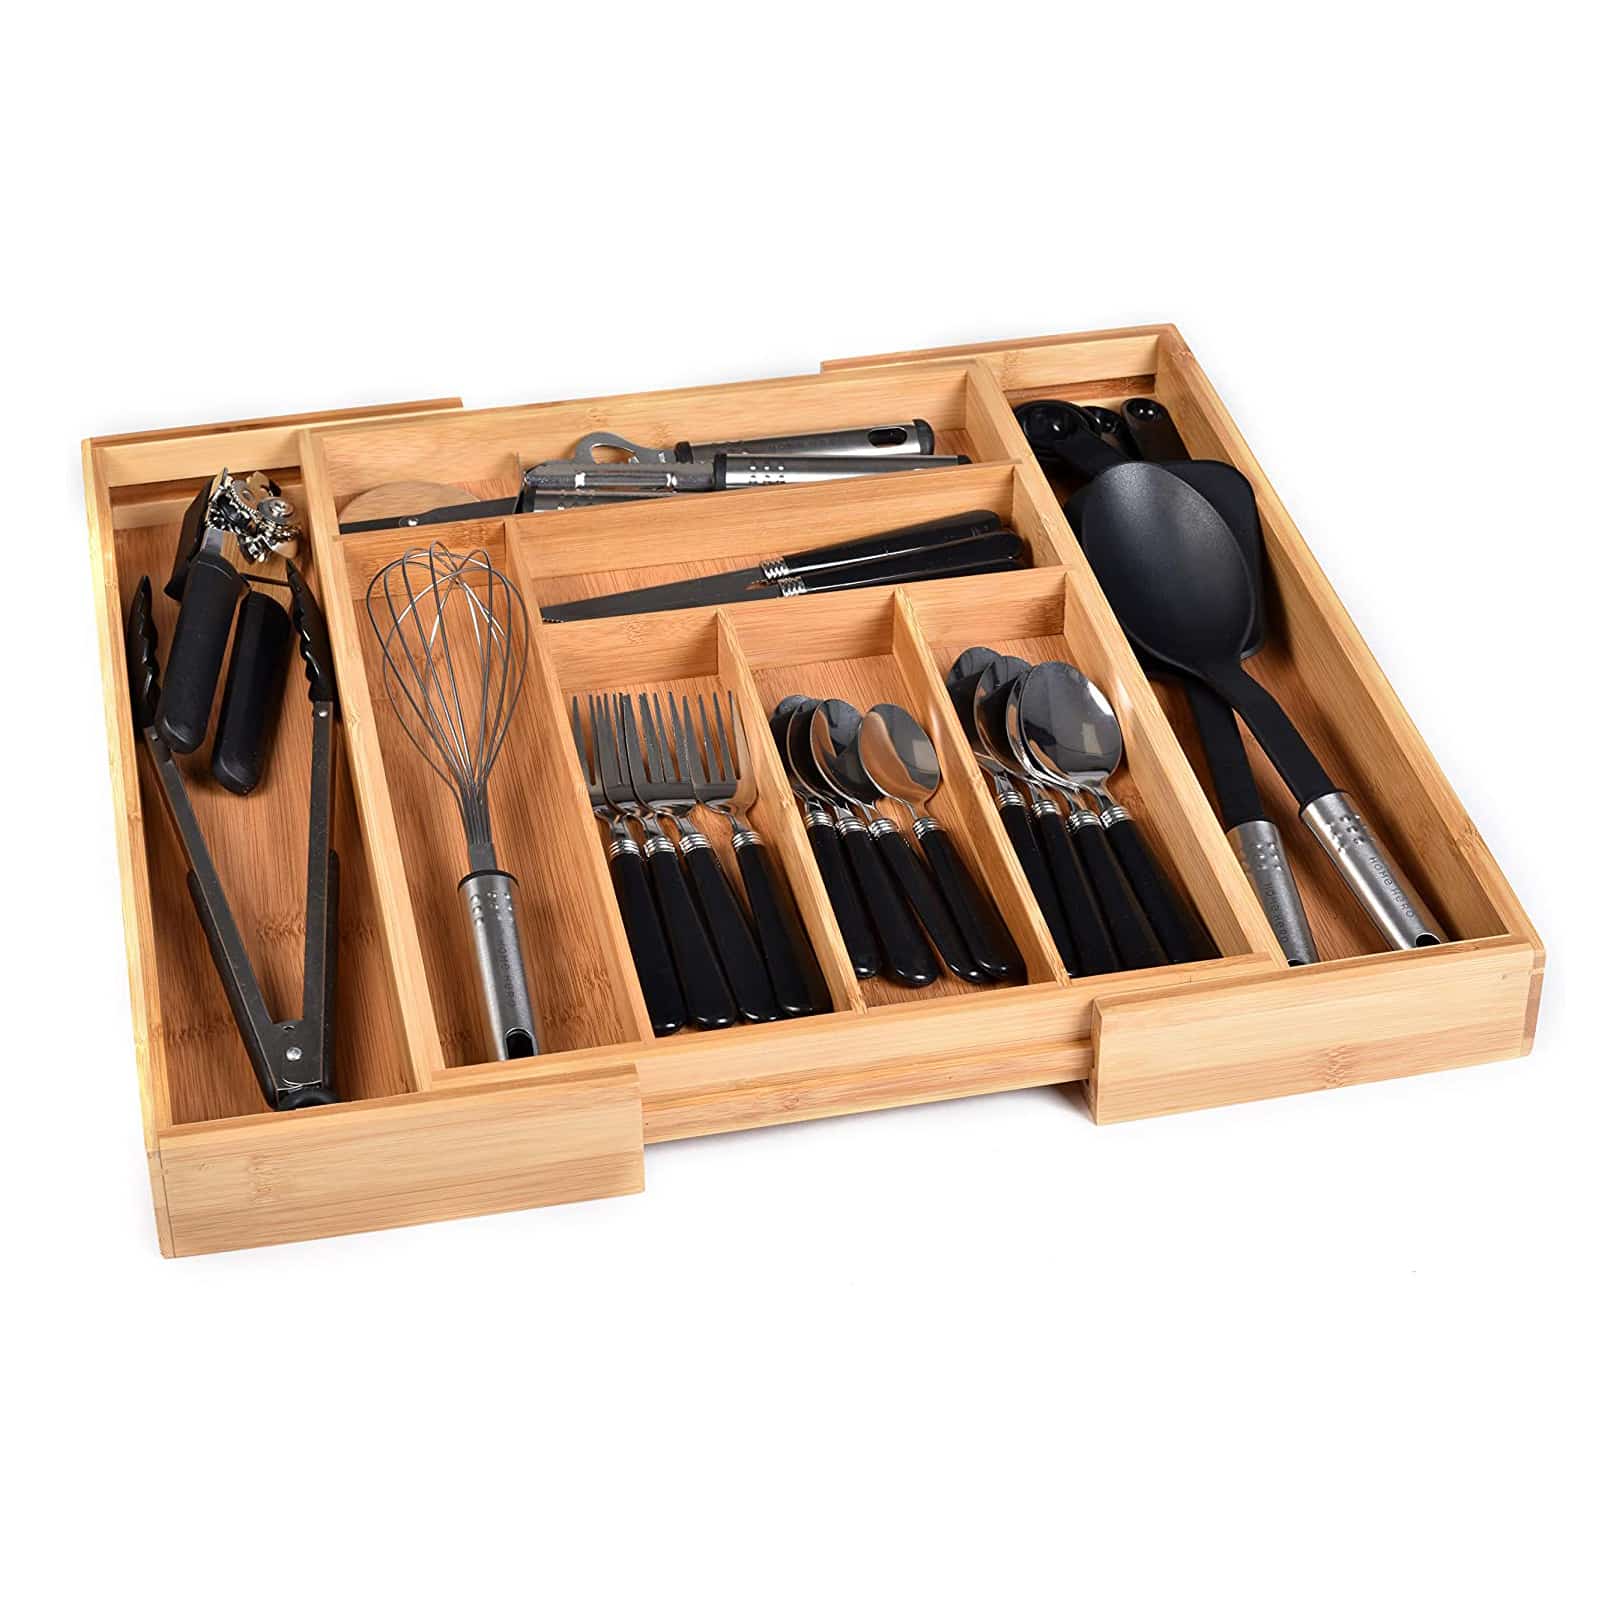 Top 10 Best Bamboo Drawer Organizers in 2021 Reviews